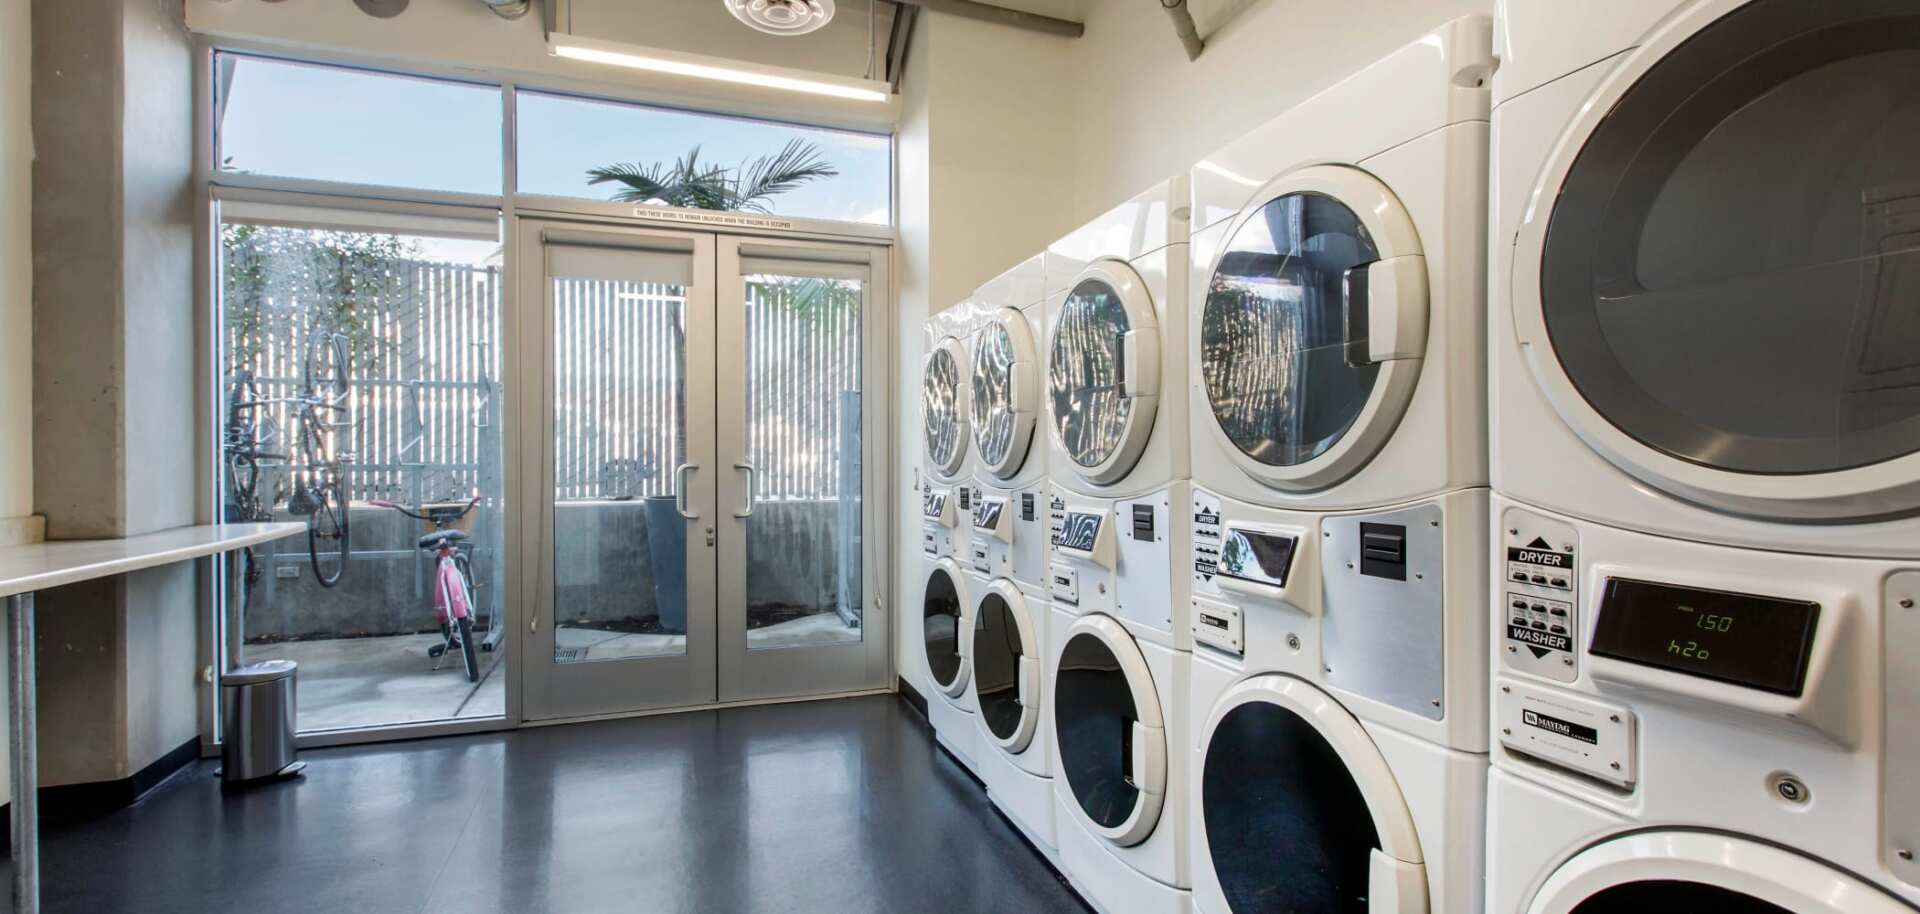 Laundry room at ICON.